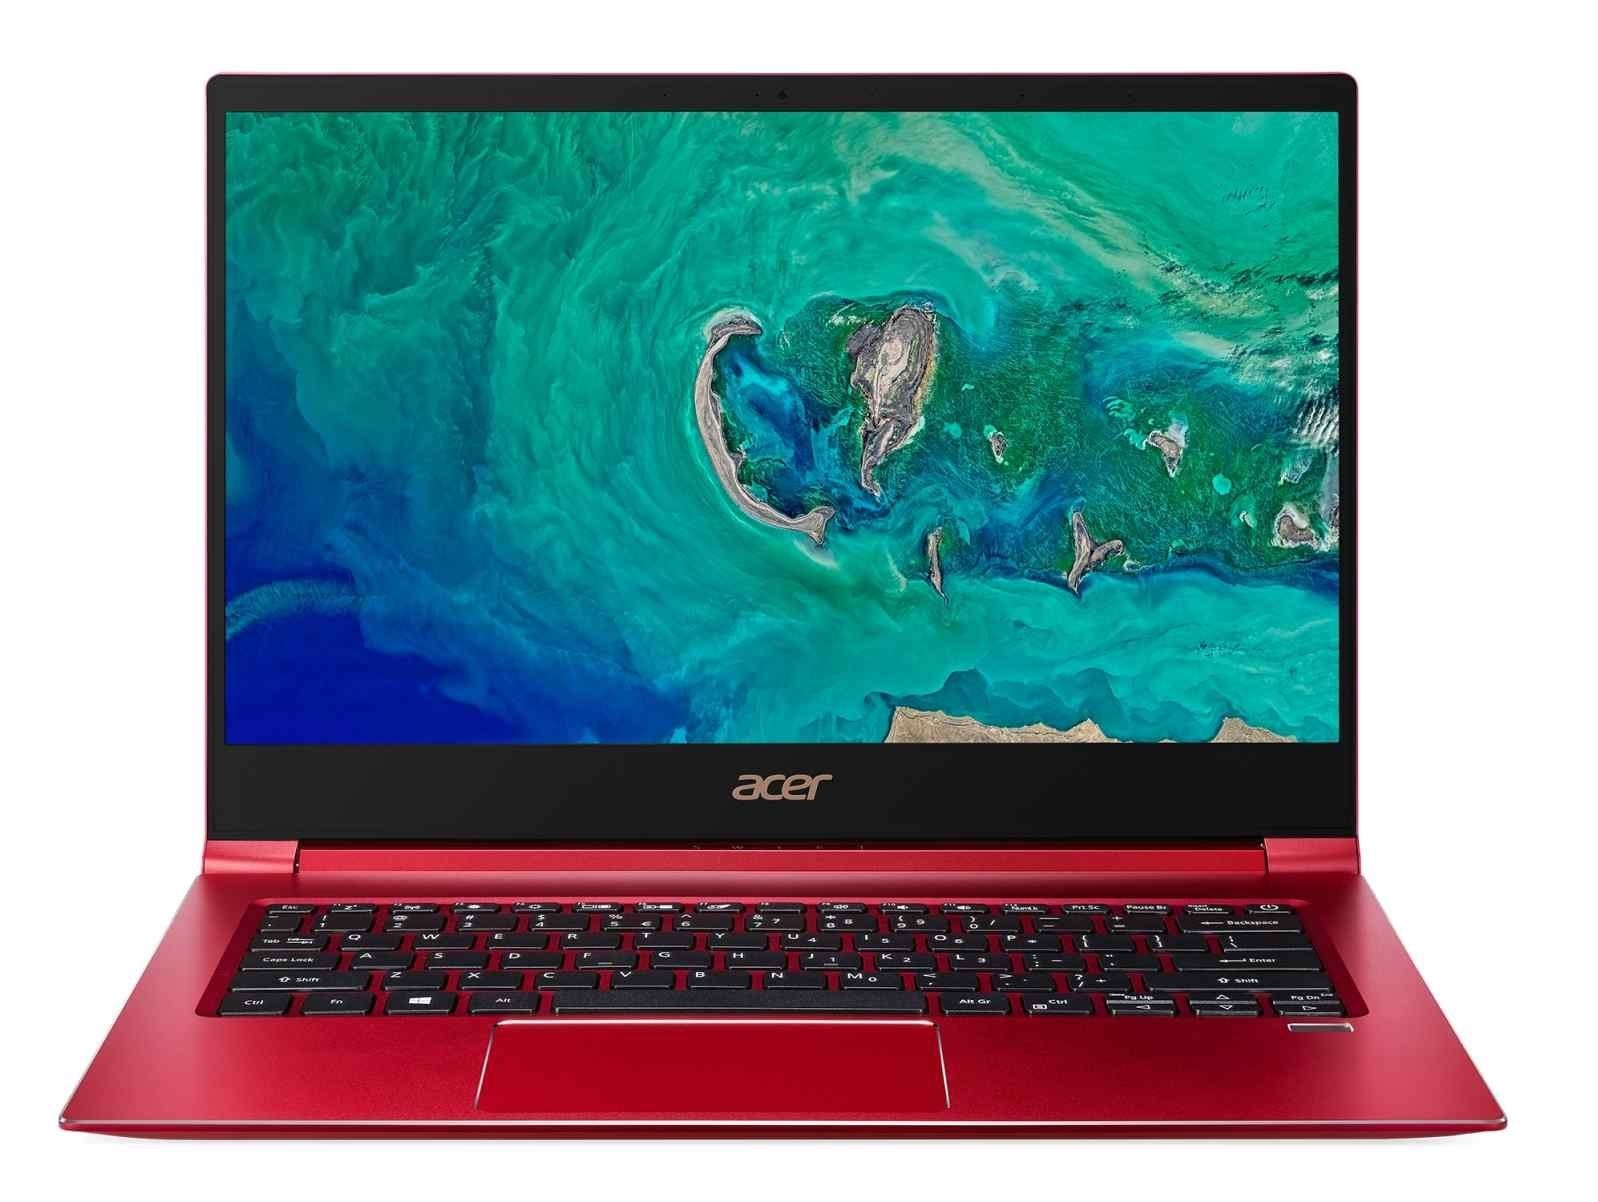 Laptop ACER Swift 3 SF314-54-32S1 NX.GZXEX.008